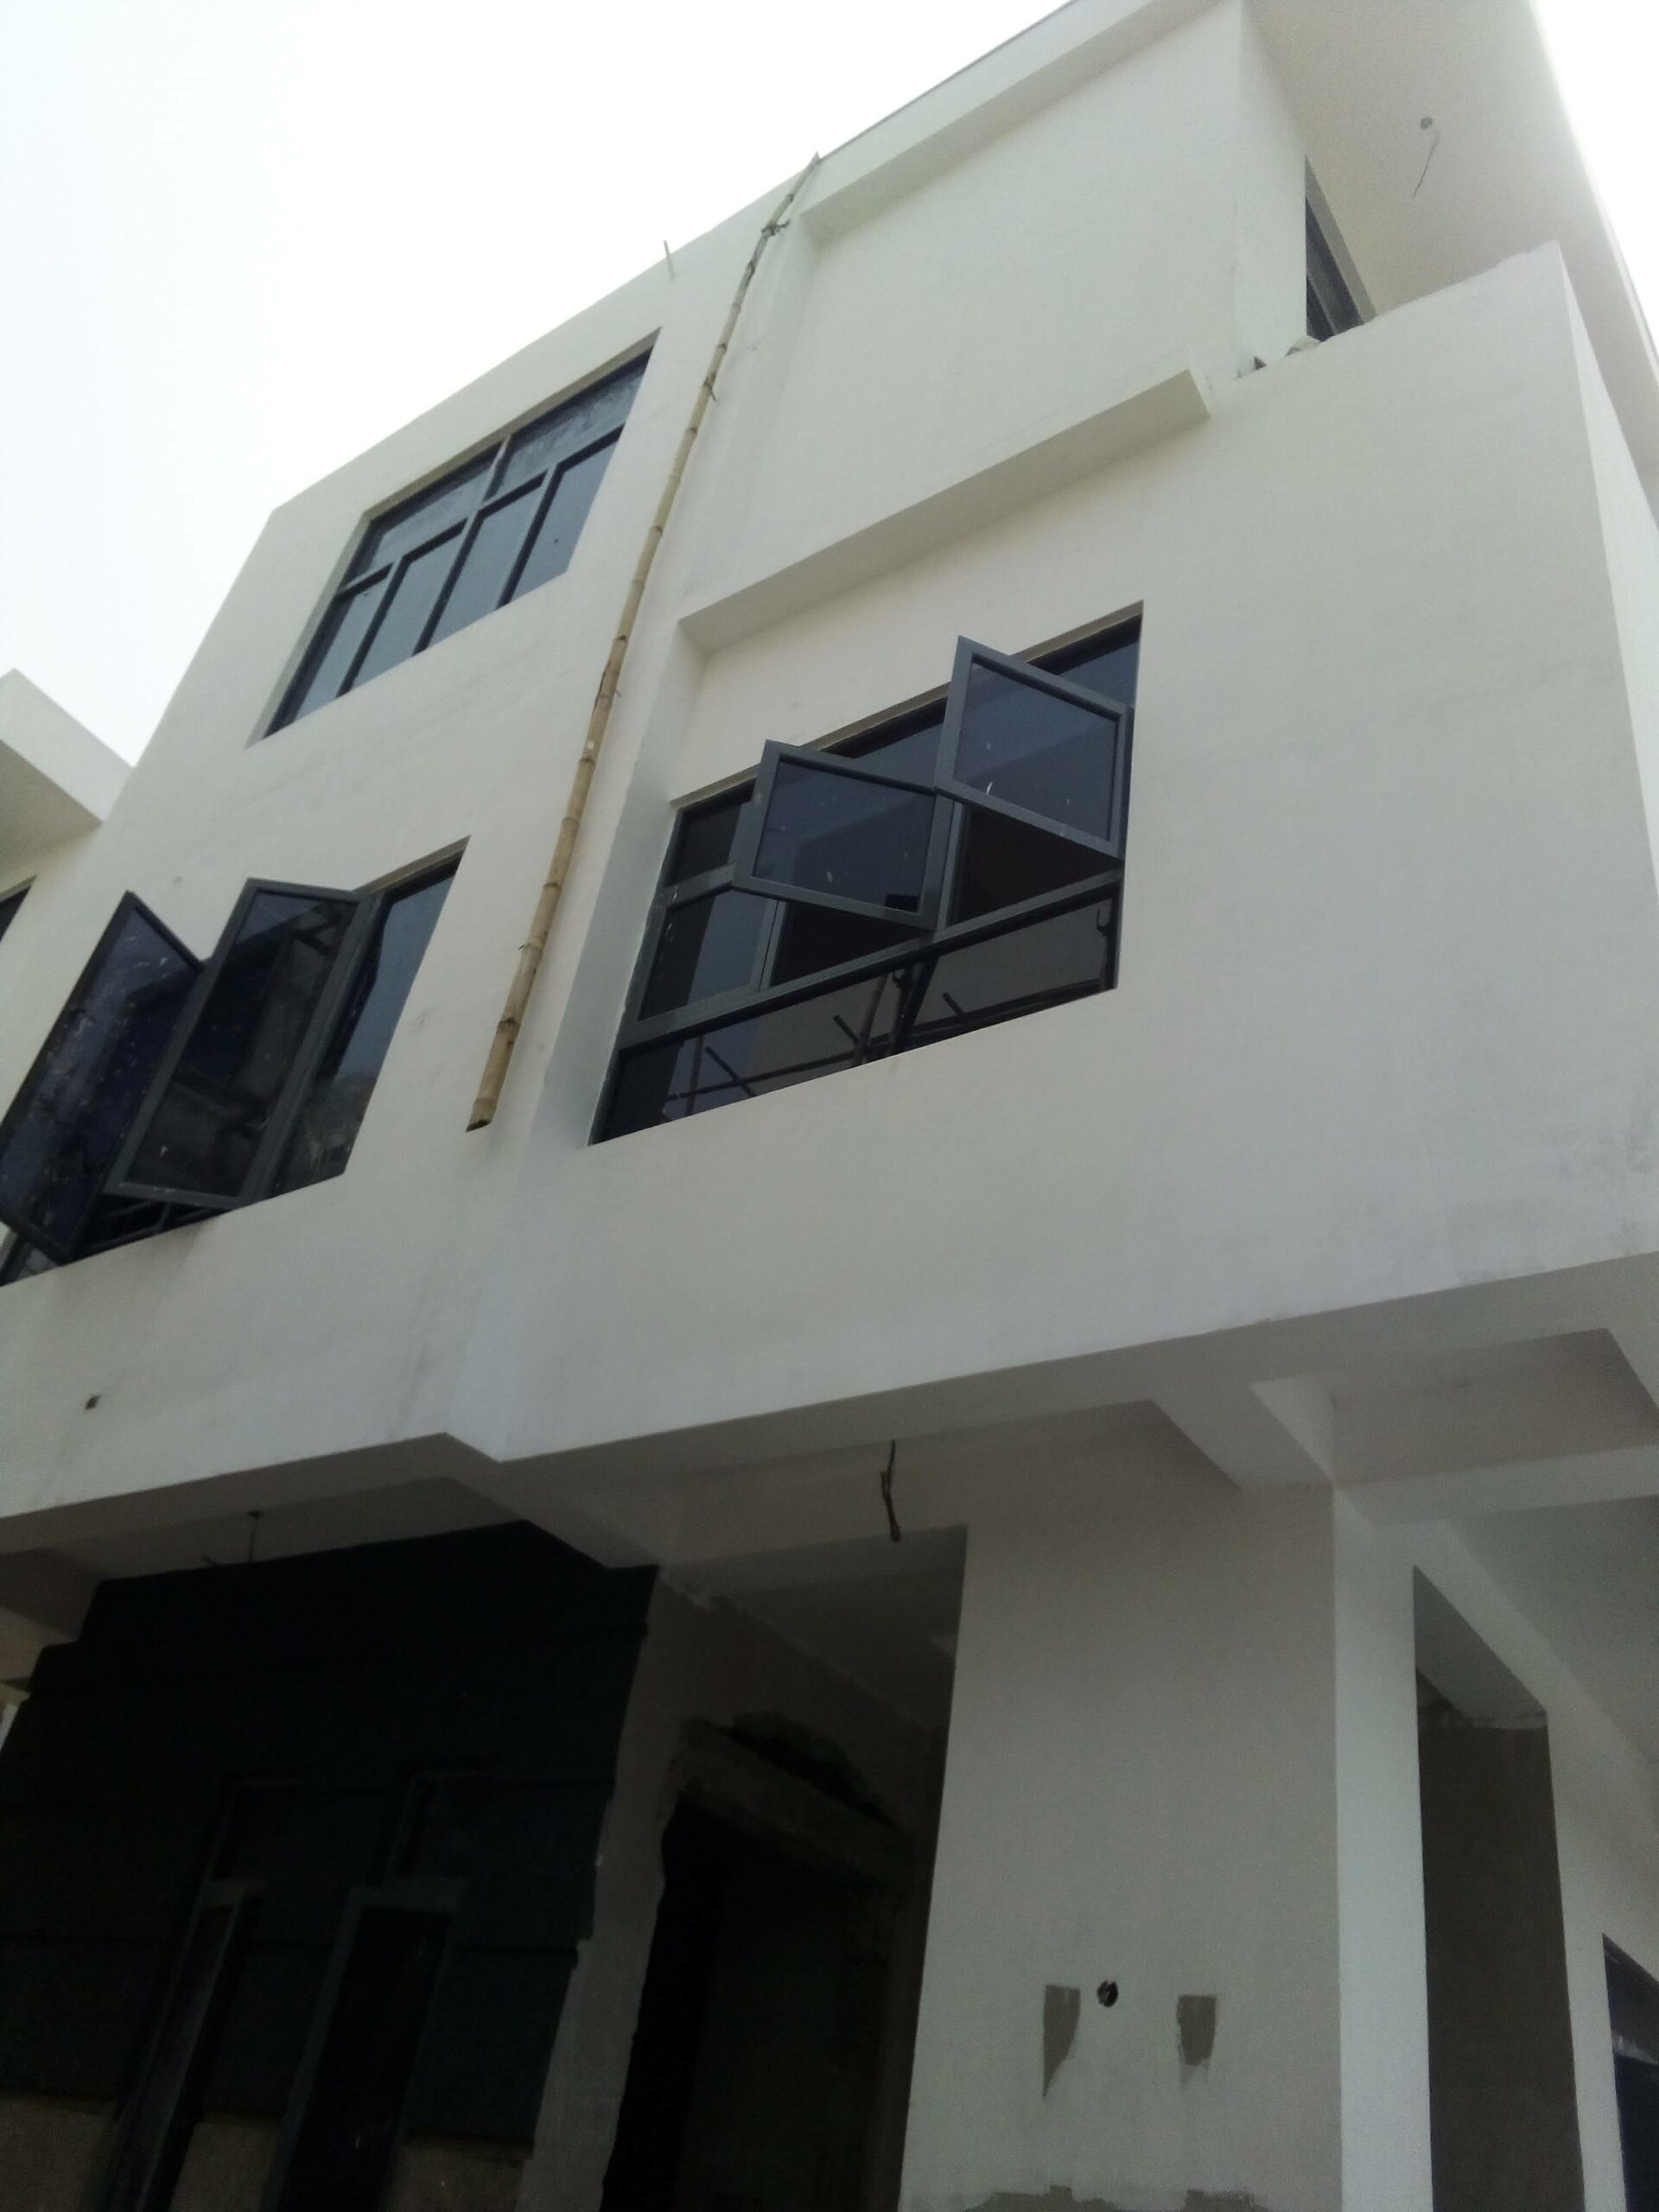 5 Bedroom Fully Detached Duplex Town House